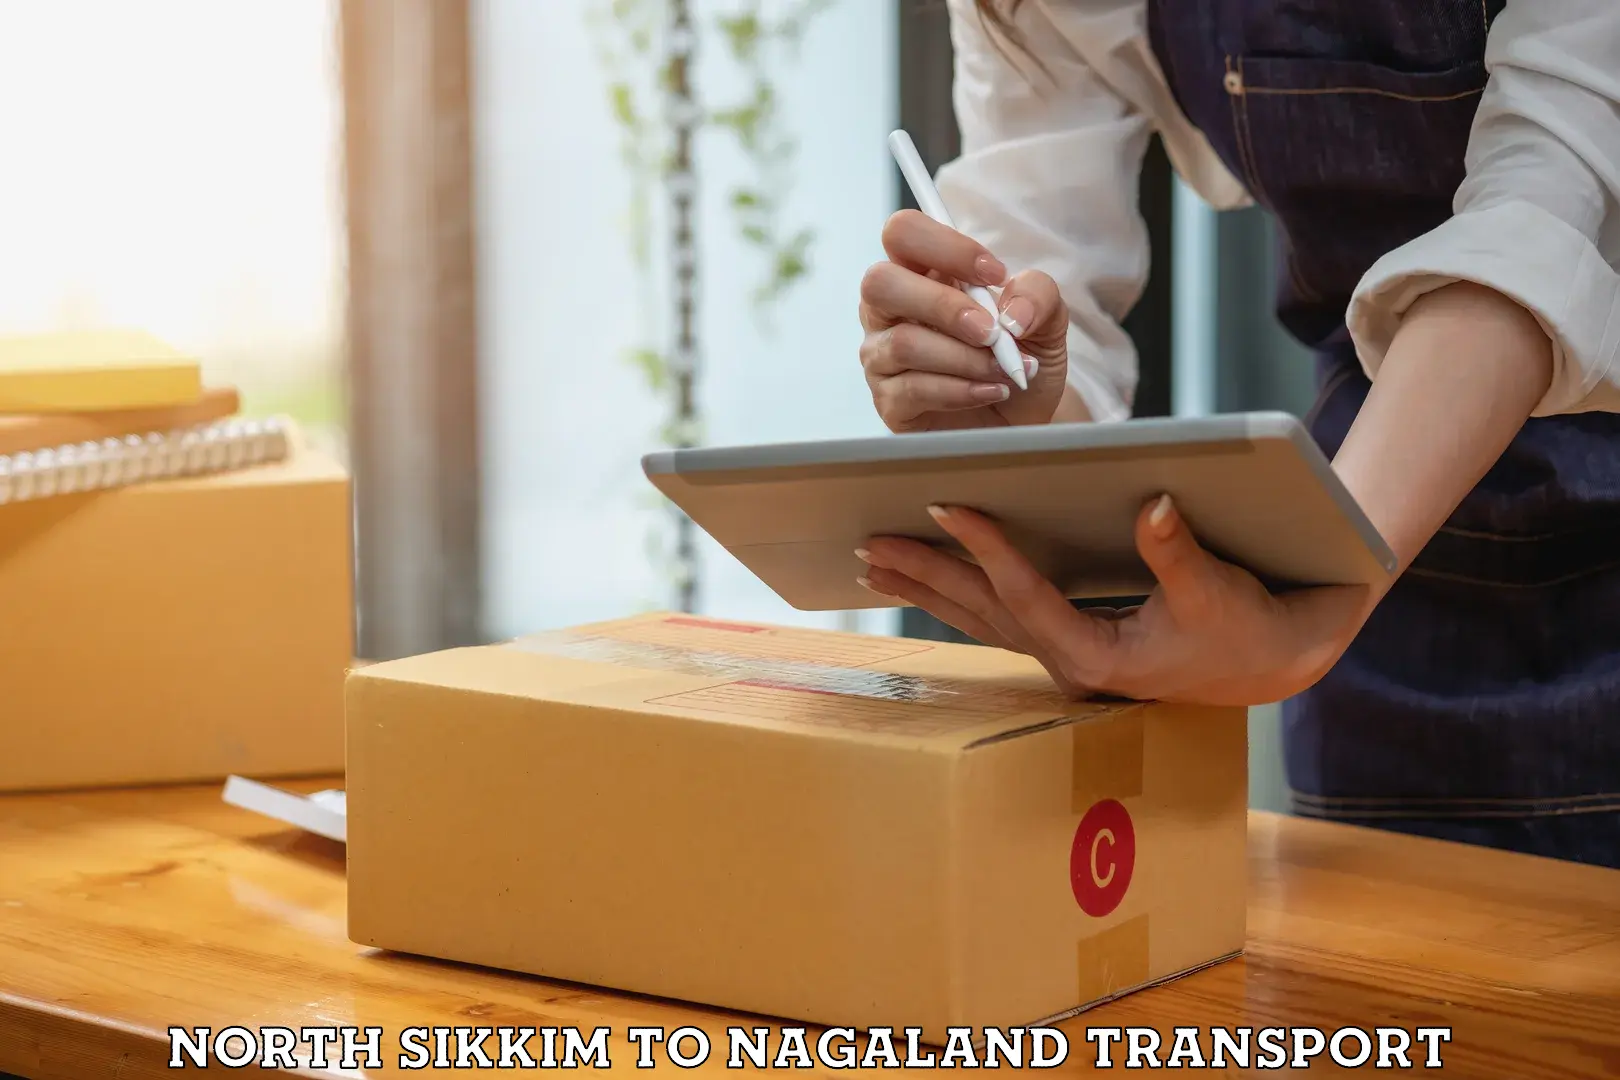 Online transport in North Sikkim to Nagaland